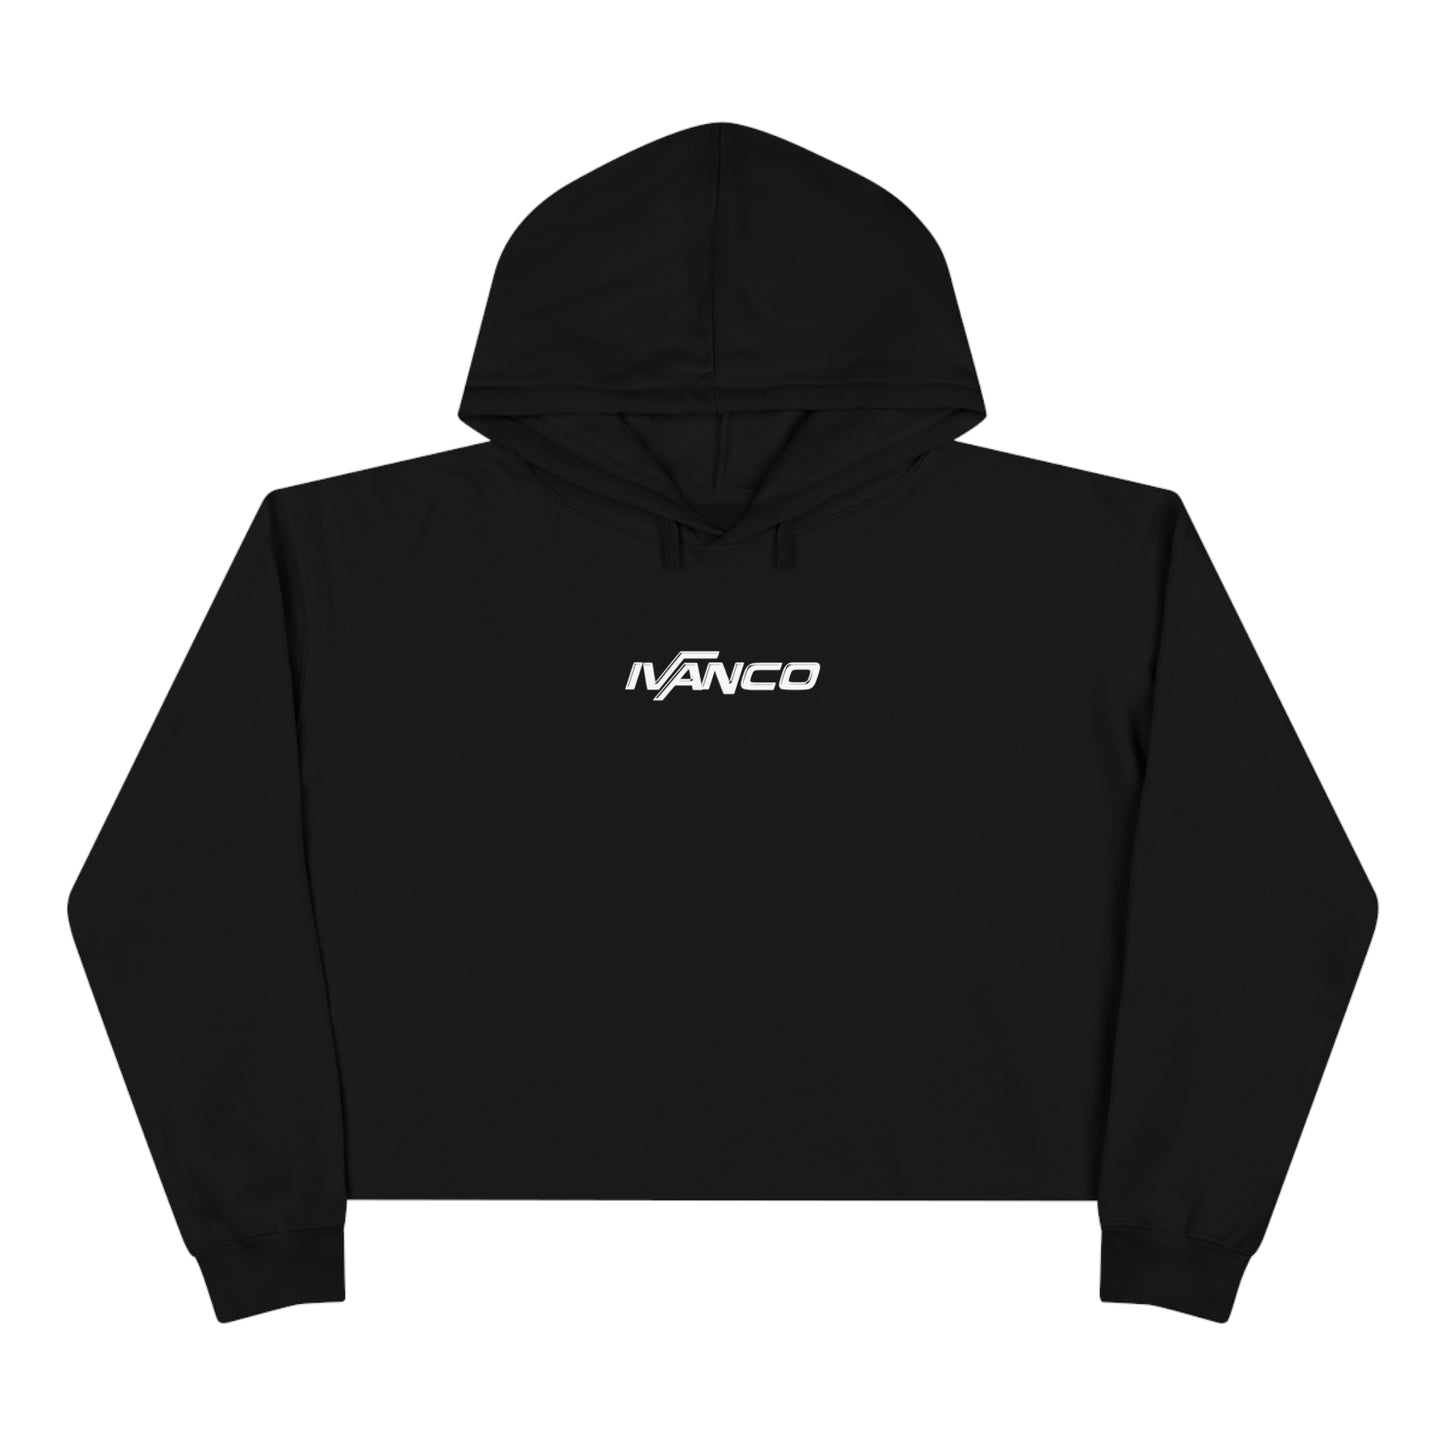 "Music is the Answer" Crop Hoodie